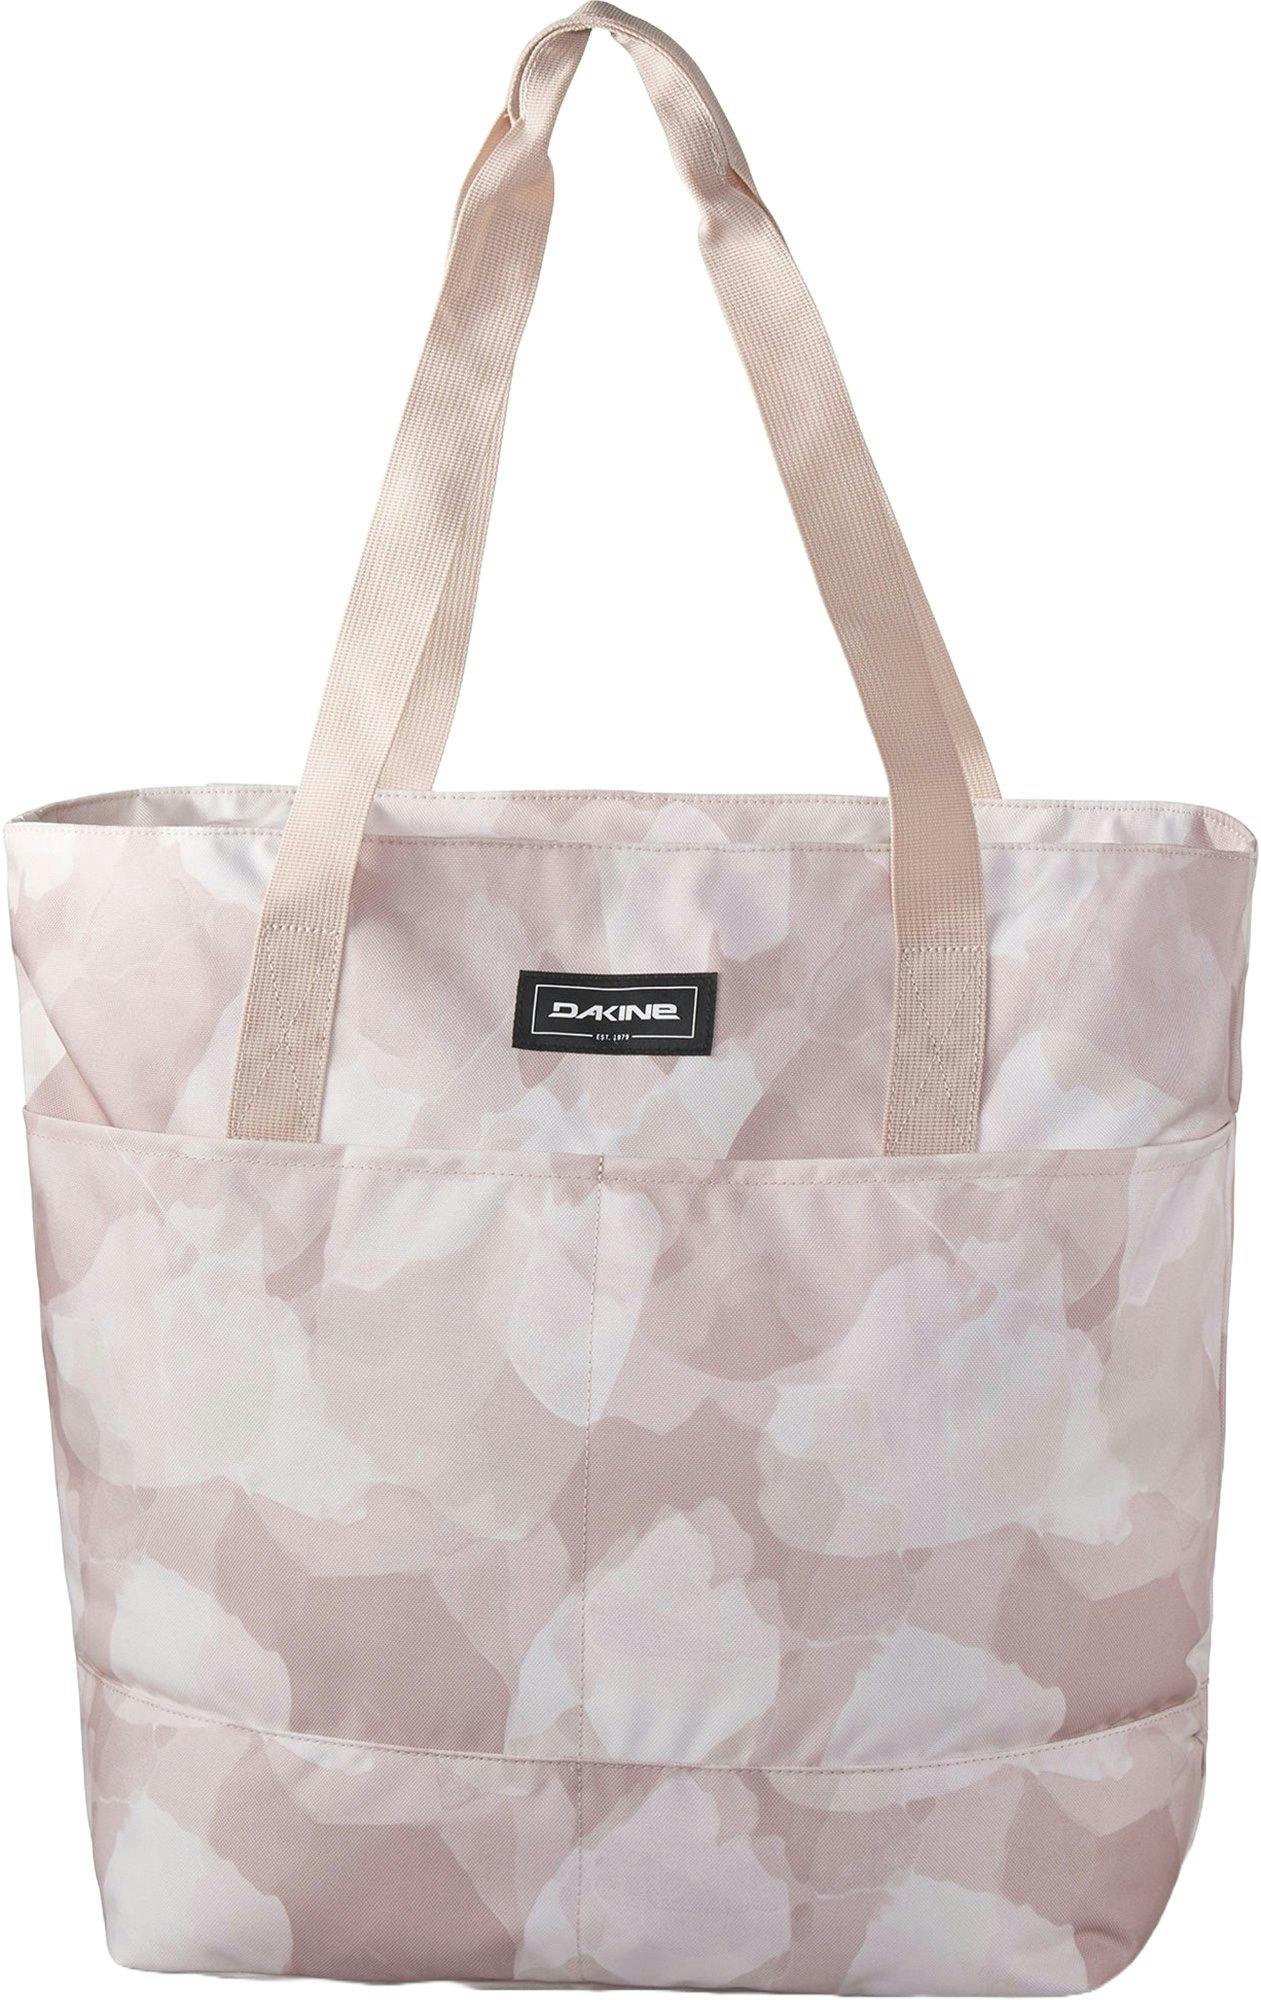 Product image for Classic Tote Bag 33L